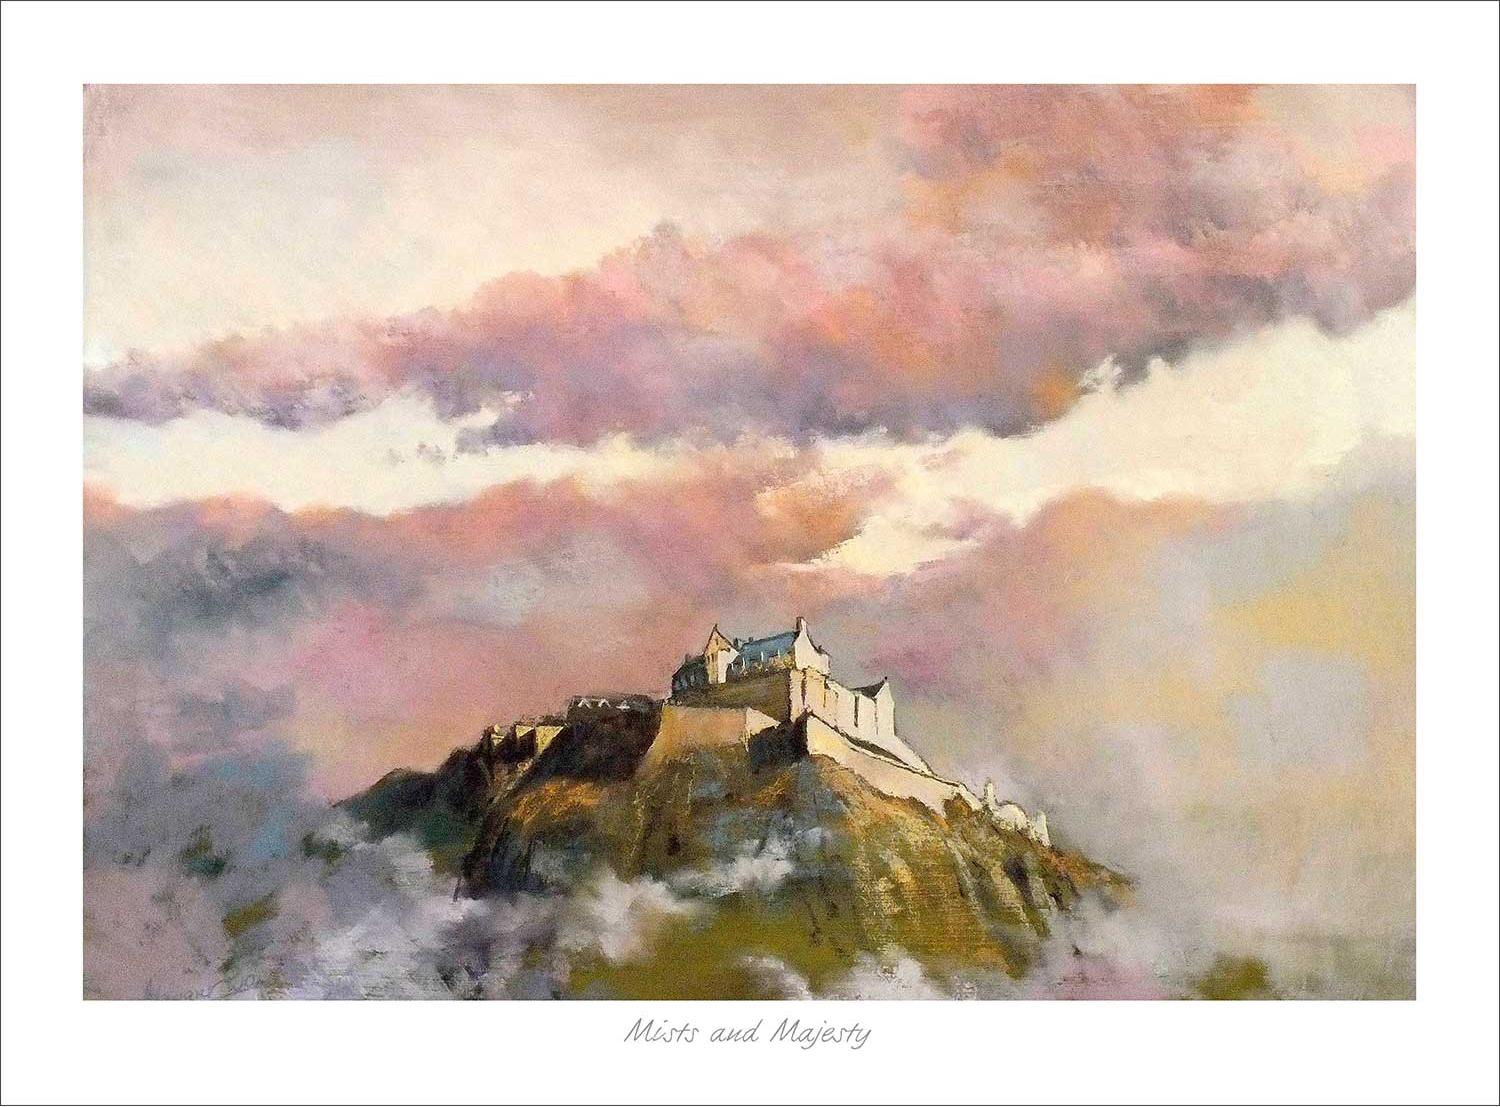 Mists and Majesty Art Print from an original painting by artist Margaret Evans